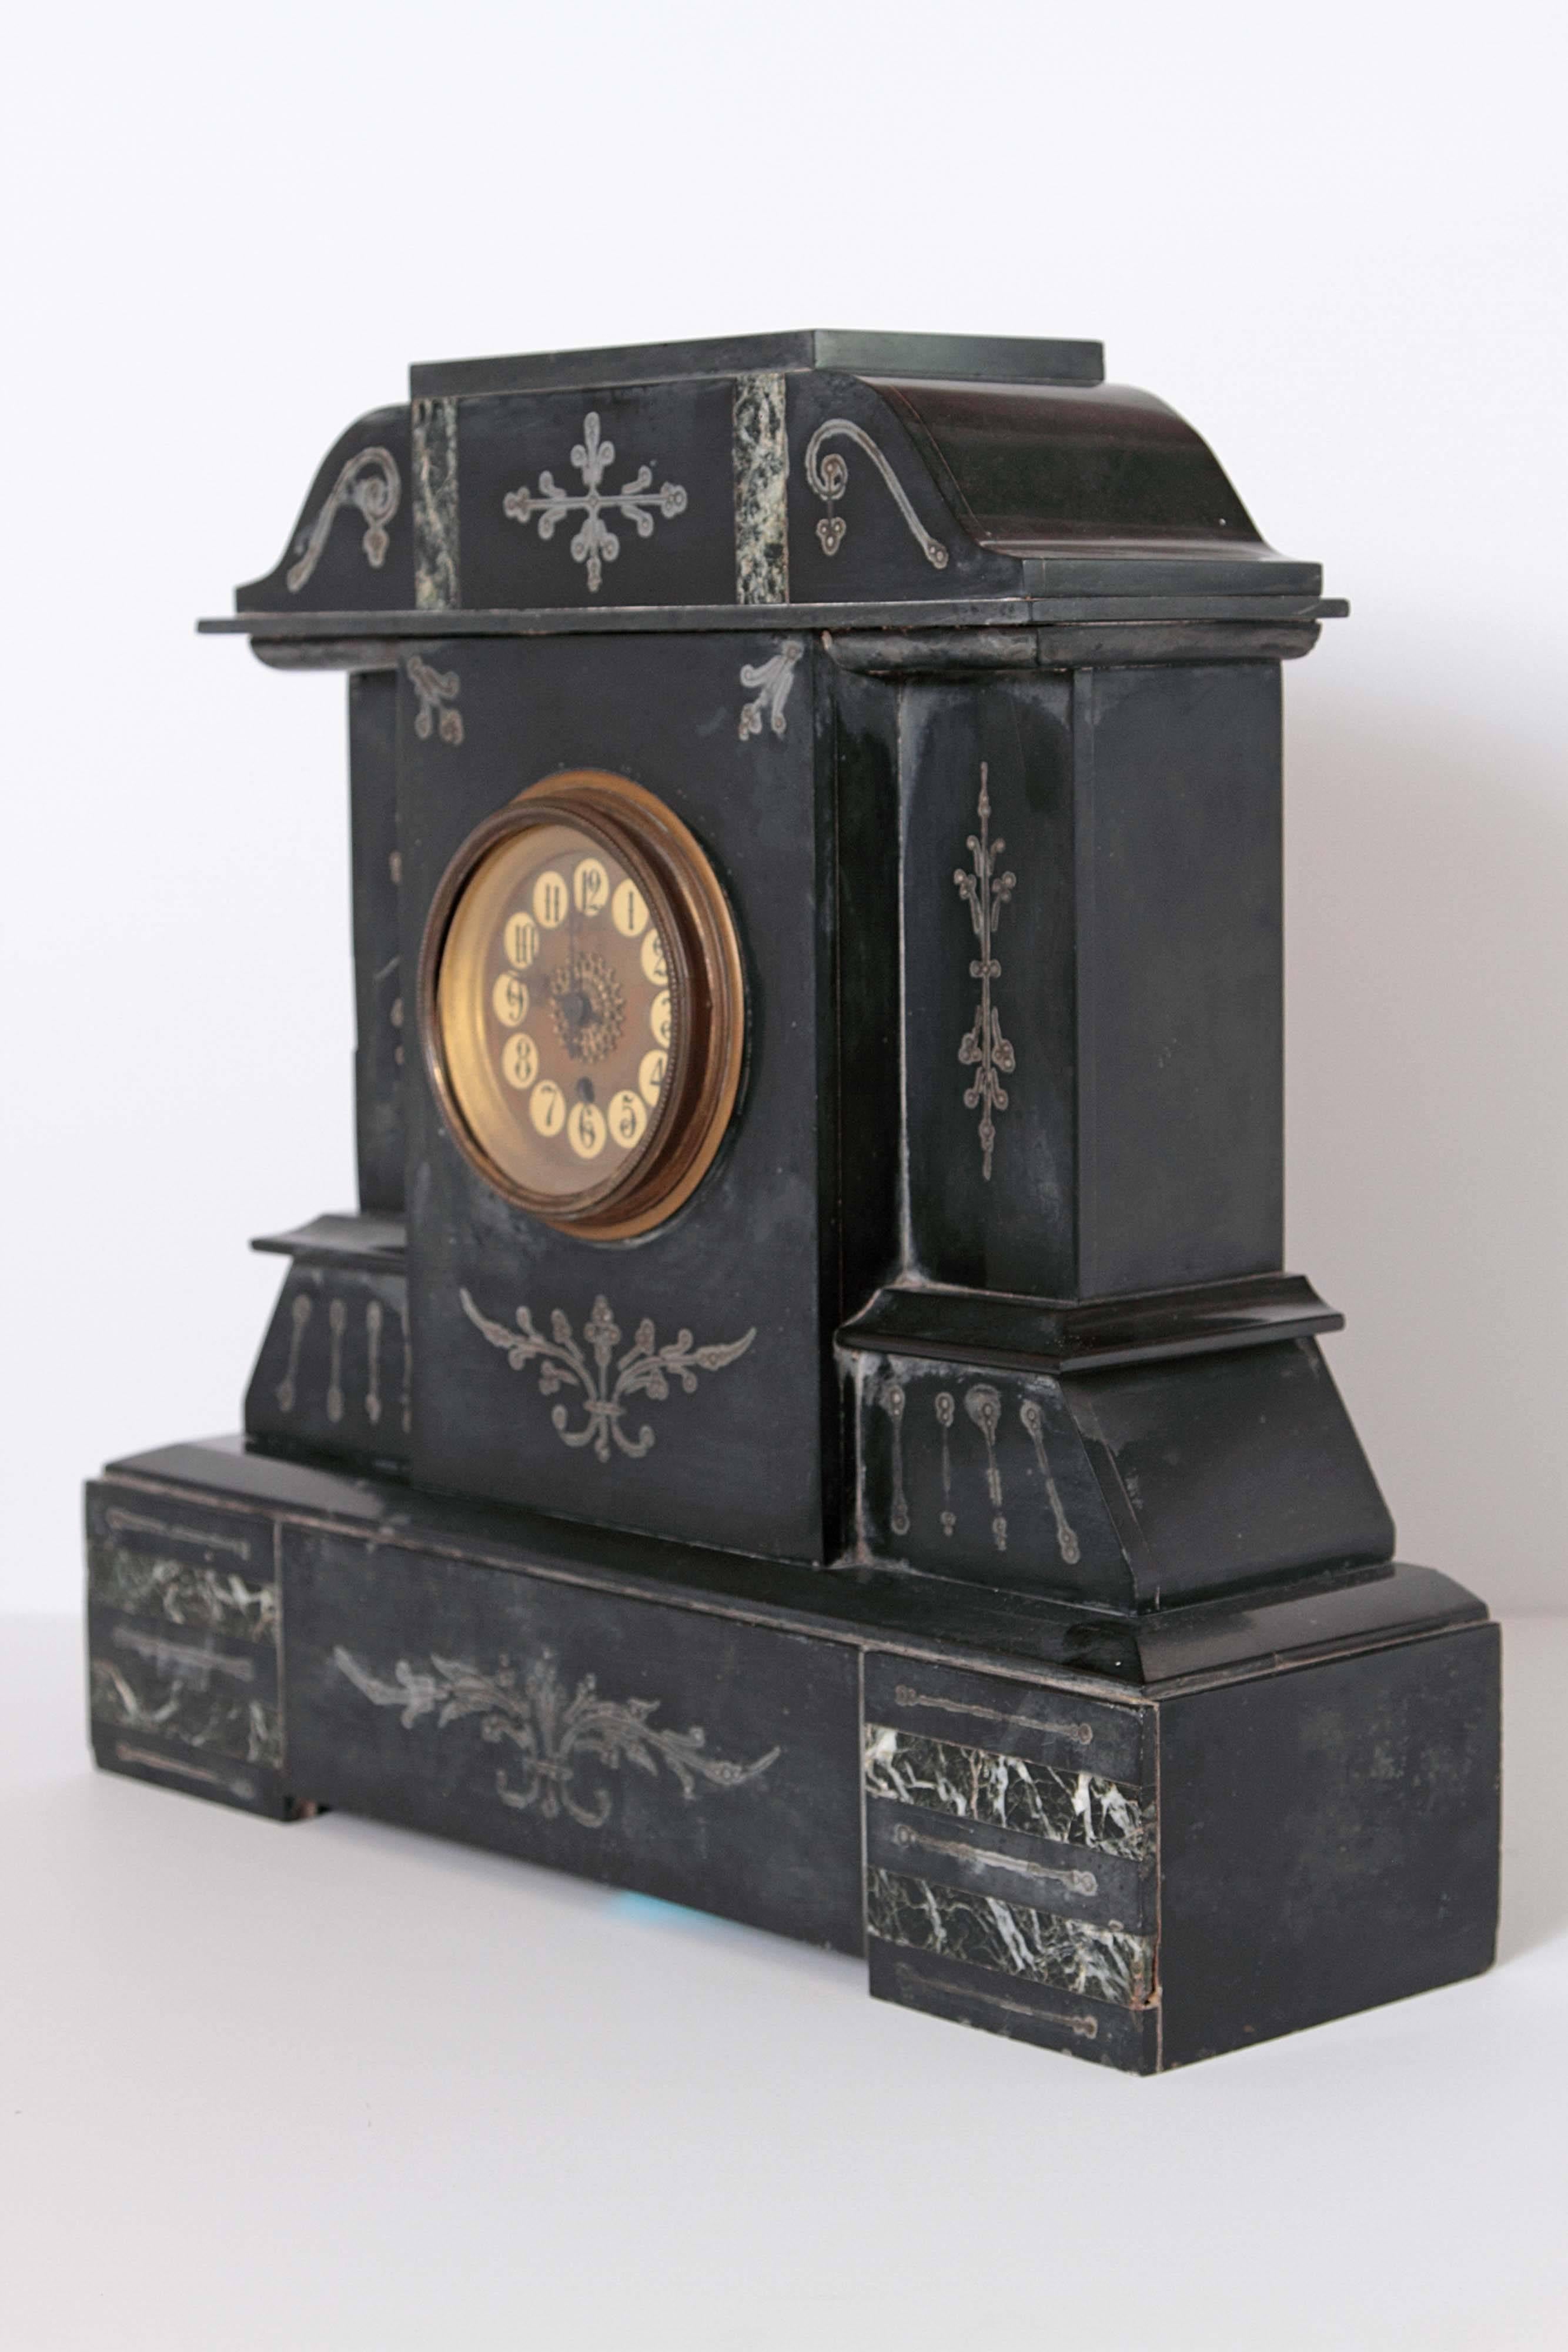 Beautiful Victorian French marble mantel clock circa 1880 with jet black nero belgio marble. This piece is in fabulous condition and includes hand-painted detailing around the face of the clock. 

Minor wear on the lower part of the marble base.